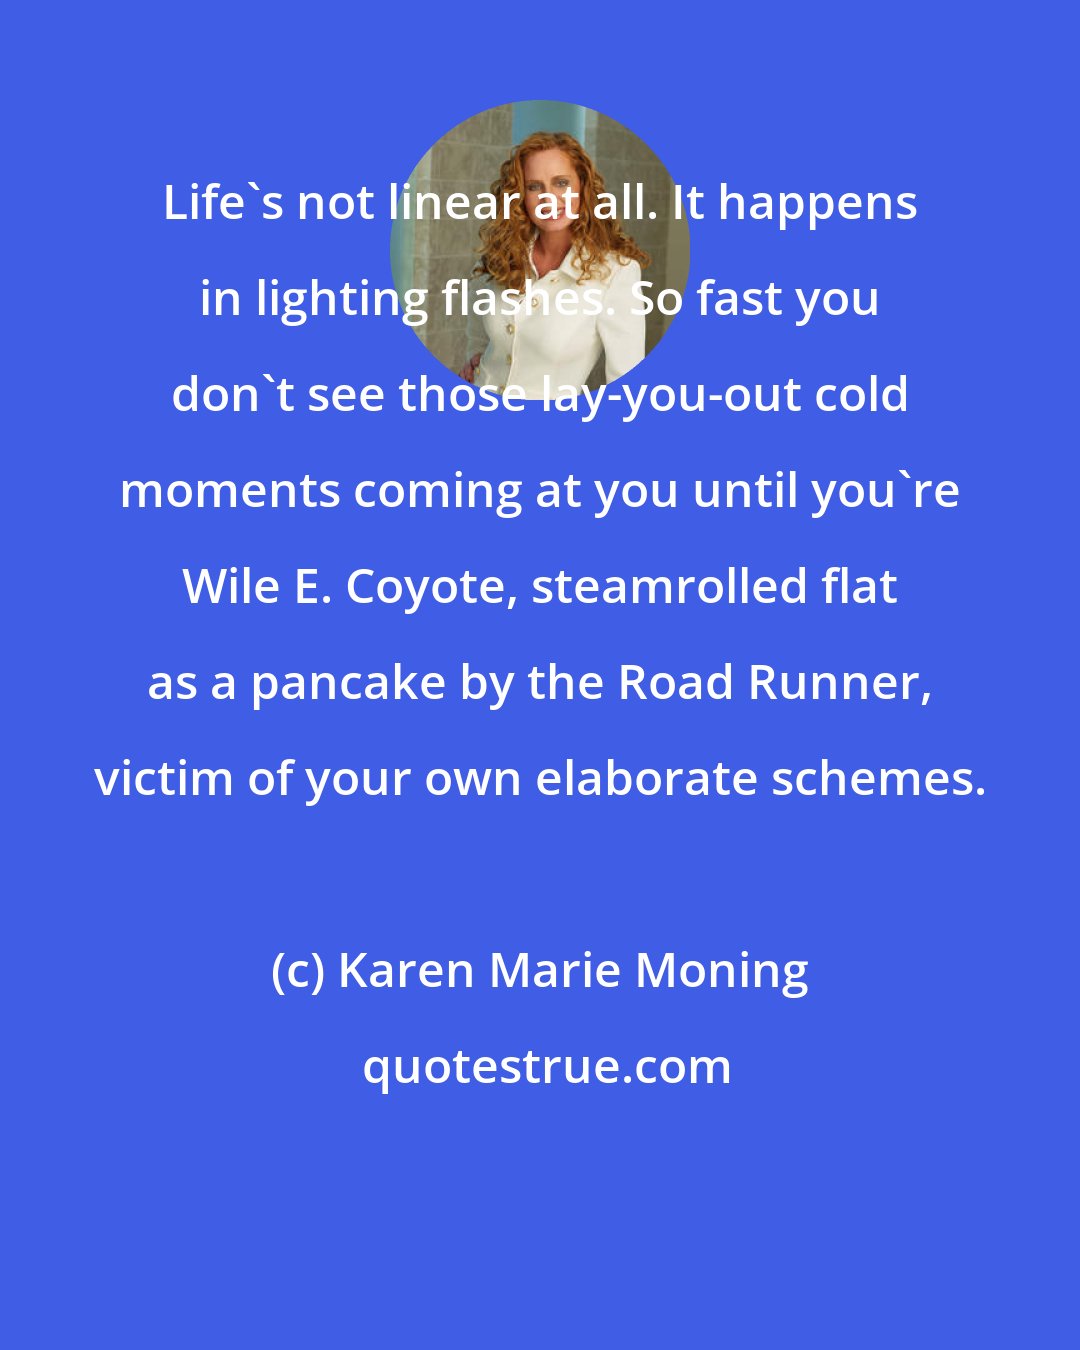 Karen Marie Moning: Life's not linear at all. It happens in lighting flashes. So fast you don't see those lay-you-out cold moments coming at you until you're Wile E. Coyote, steamrolled flat as a pancake by the Road Runner, victim of your own elaborate schemes.